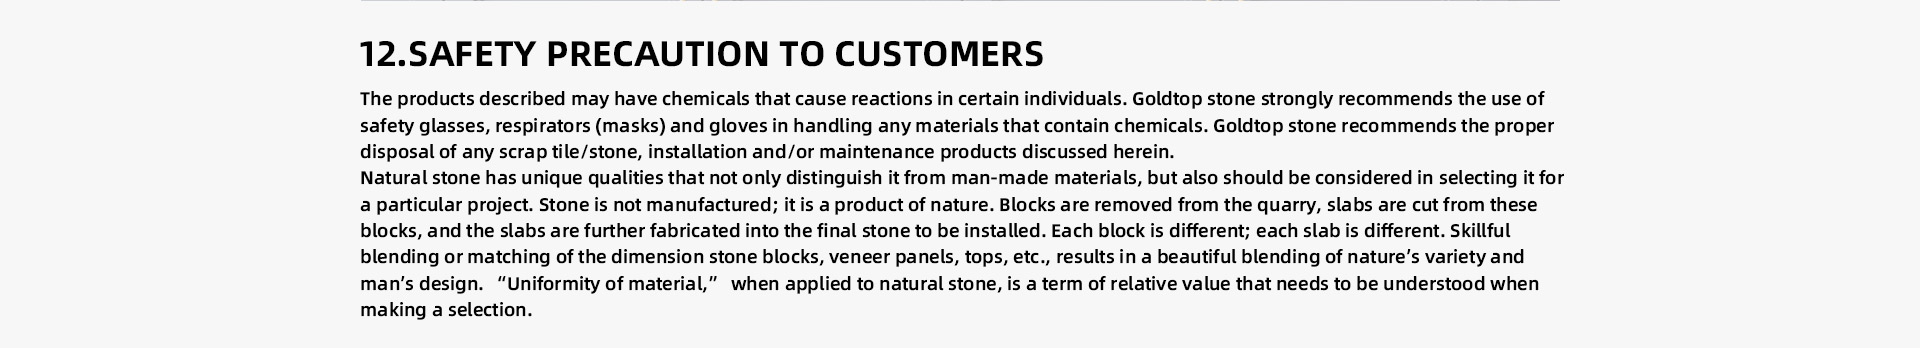 MIXING TYPES OF MATERIALS Designs calling for a mixture of stones with different physical properties, while aesthetically interesting, can give rise to problems of wear and maintenance, especially in outdoor applications. Re-polishing will pose problems as well. The customer should be aware that mixing types of stones means there will be different application limitations, abrasion resistance levels, and different densities of stones that must be considered in the long term maintenance of the stone and its wearability.  